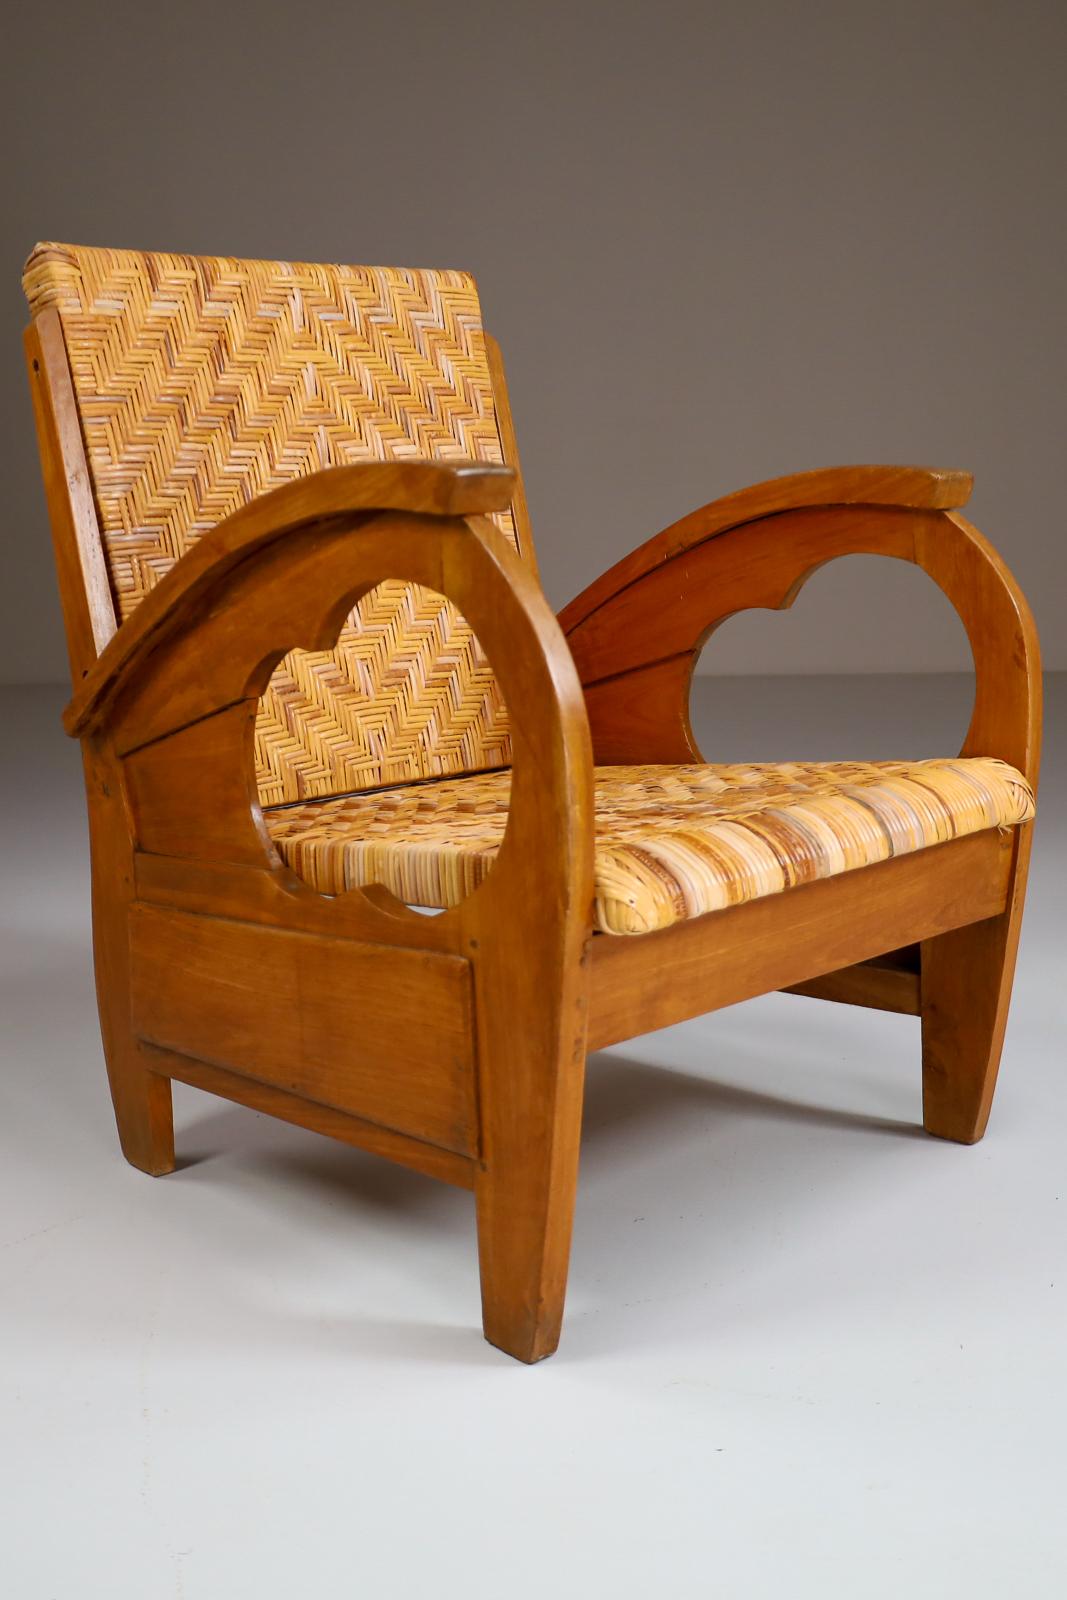 British Colonial Rattan and Wood Art Deco Arm Chair, India, 1920s For Sale 2